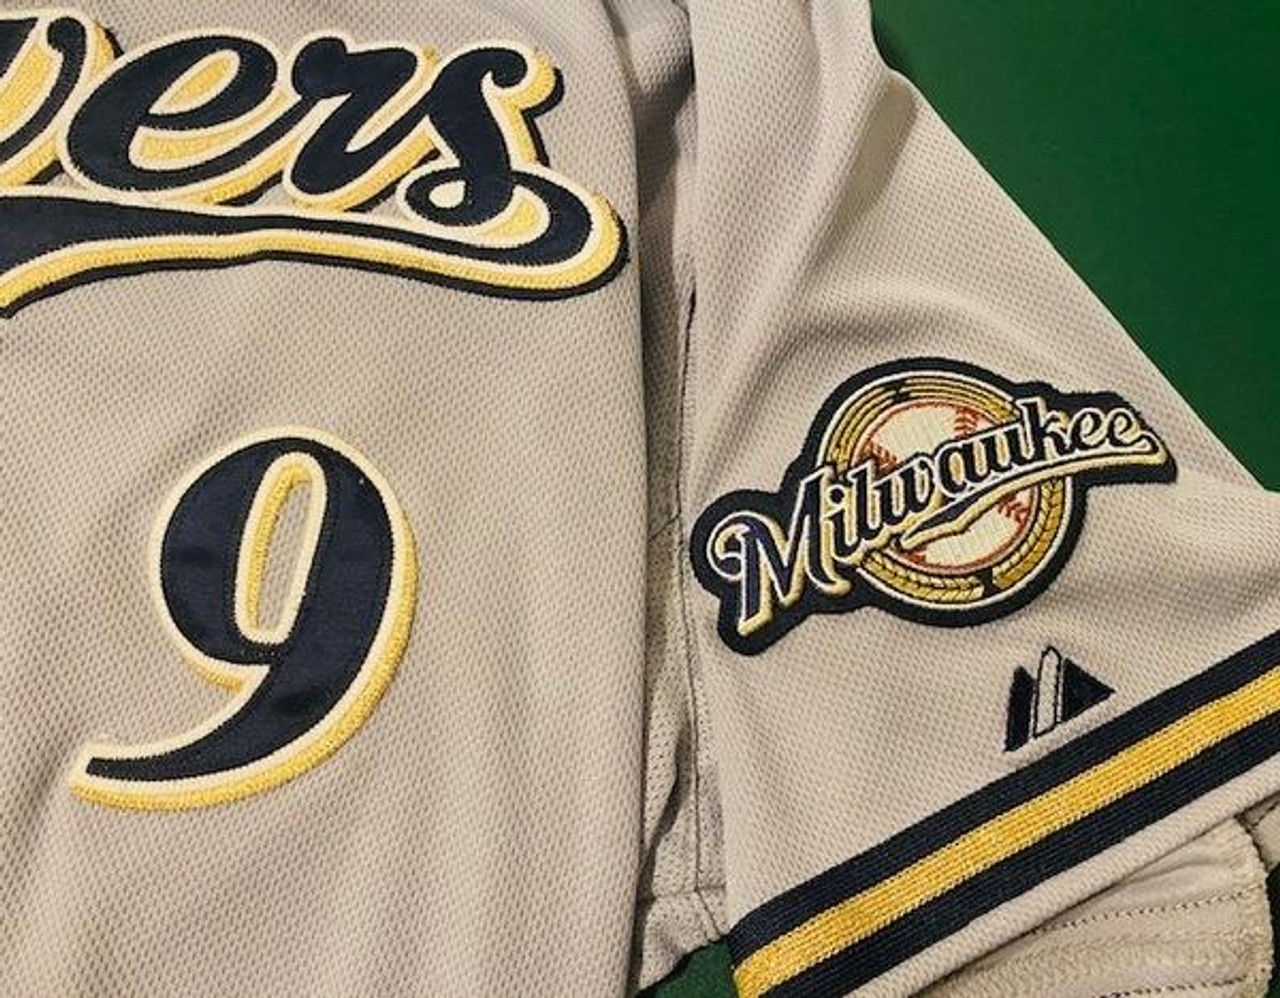 Milwaukee Brewers Authentic Cerveceros Jersey Worn By Team Mascot